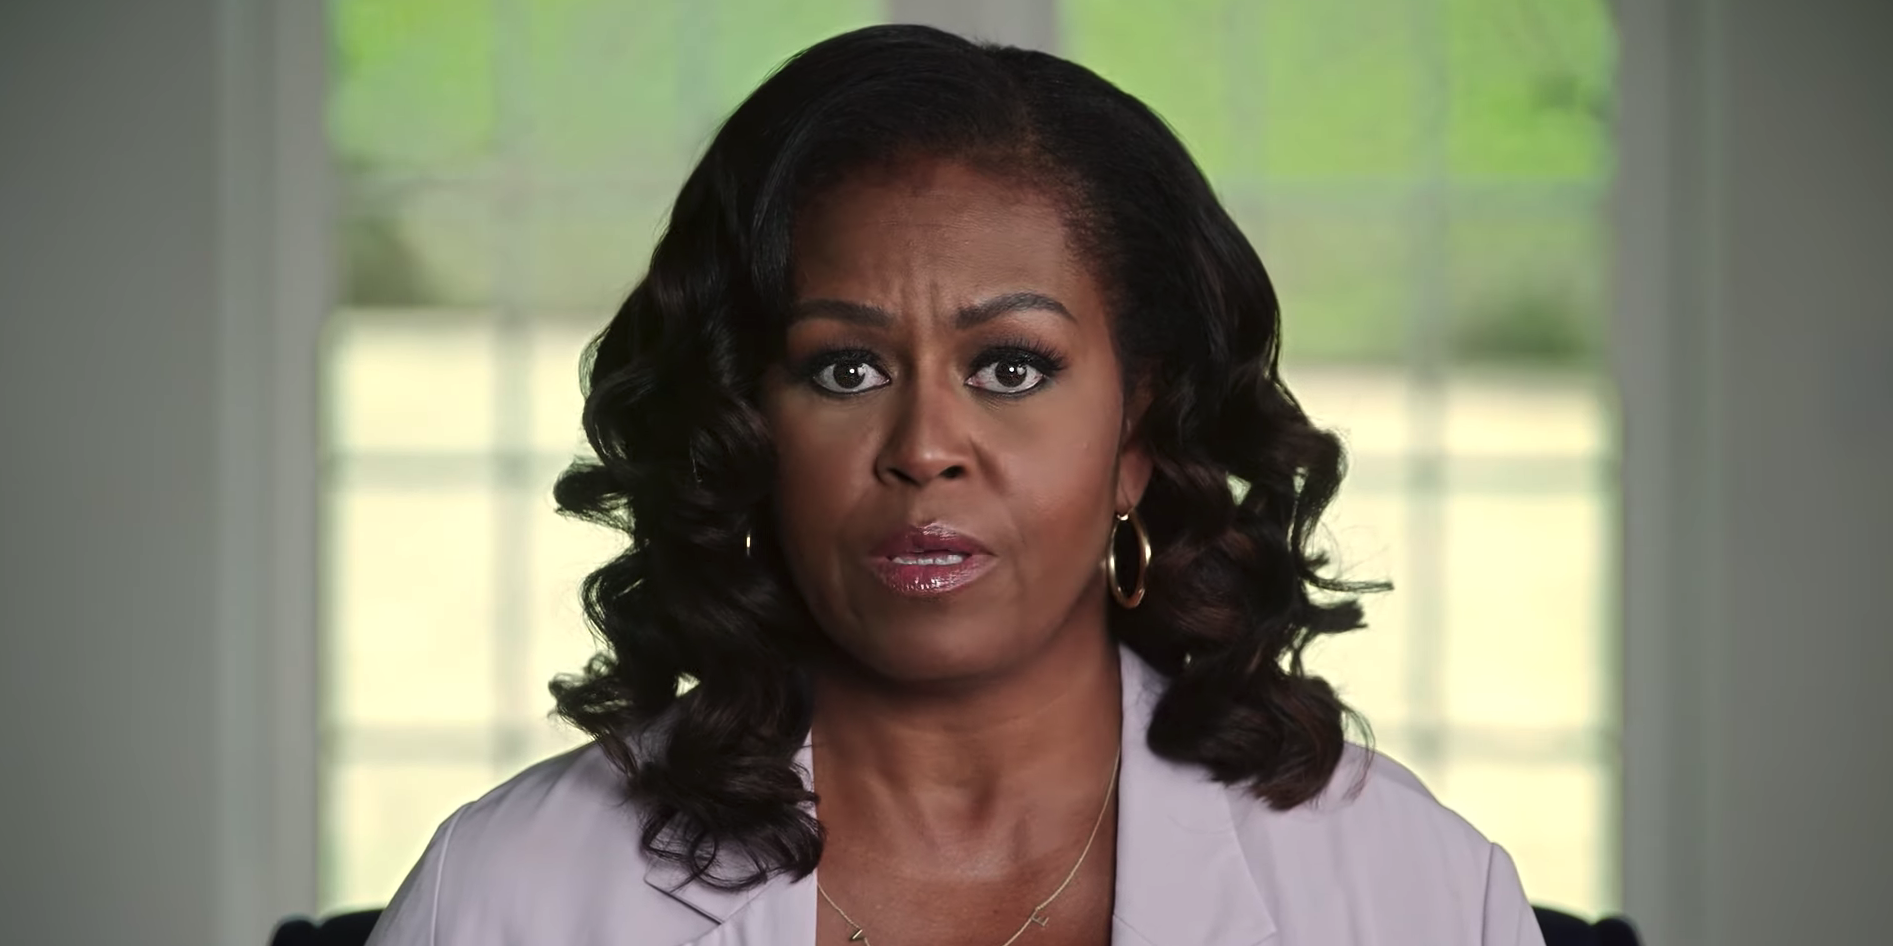 Michelle Obama speaks in a new video about the presidential election.